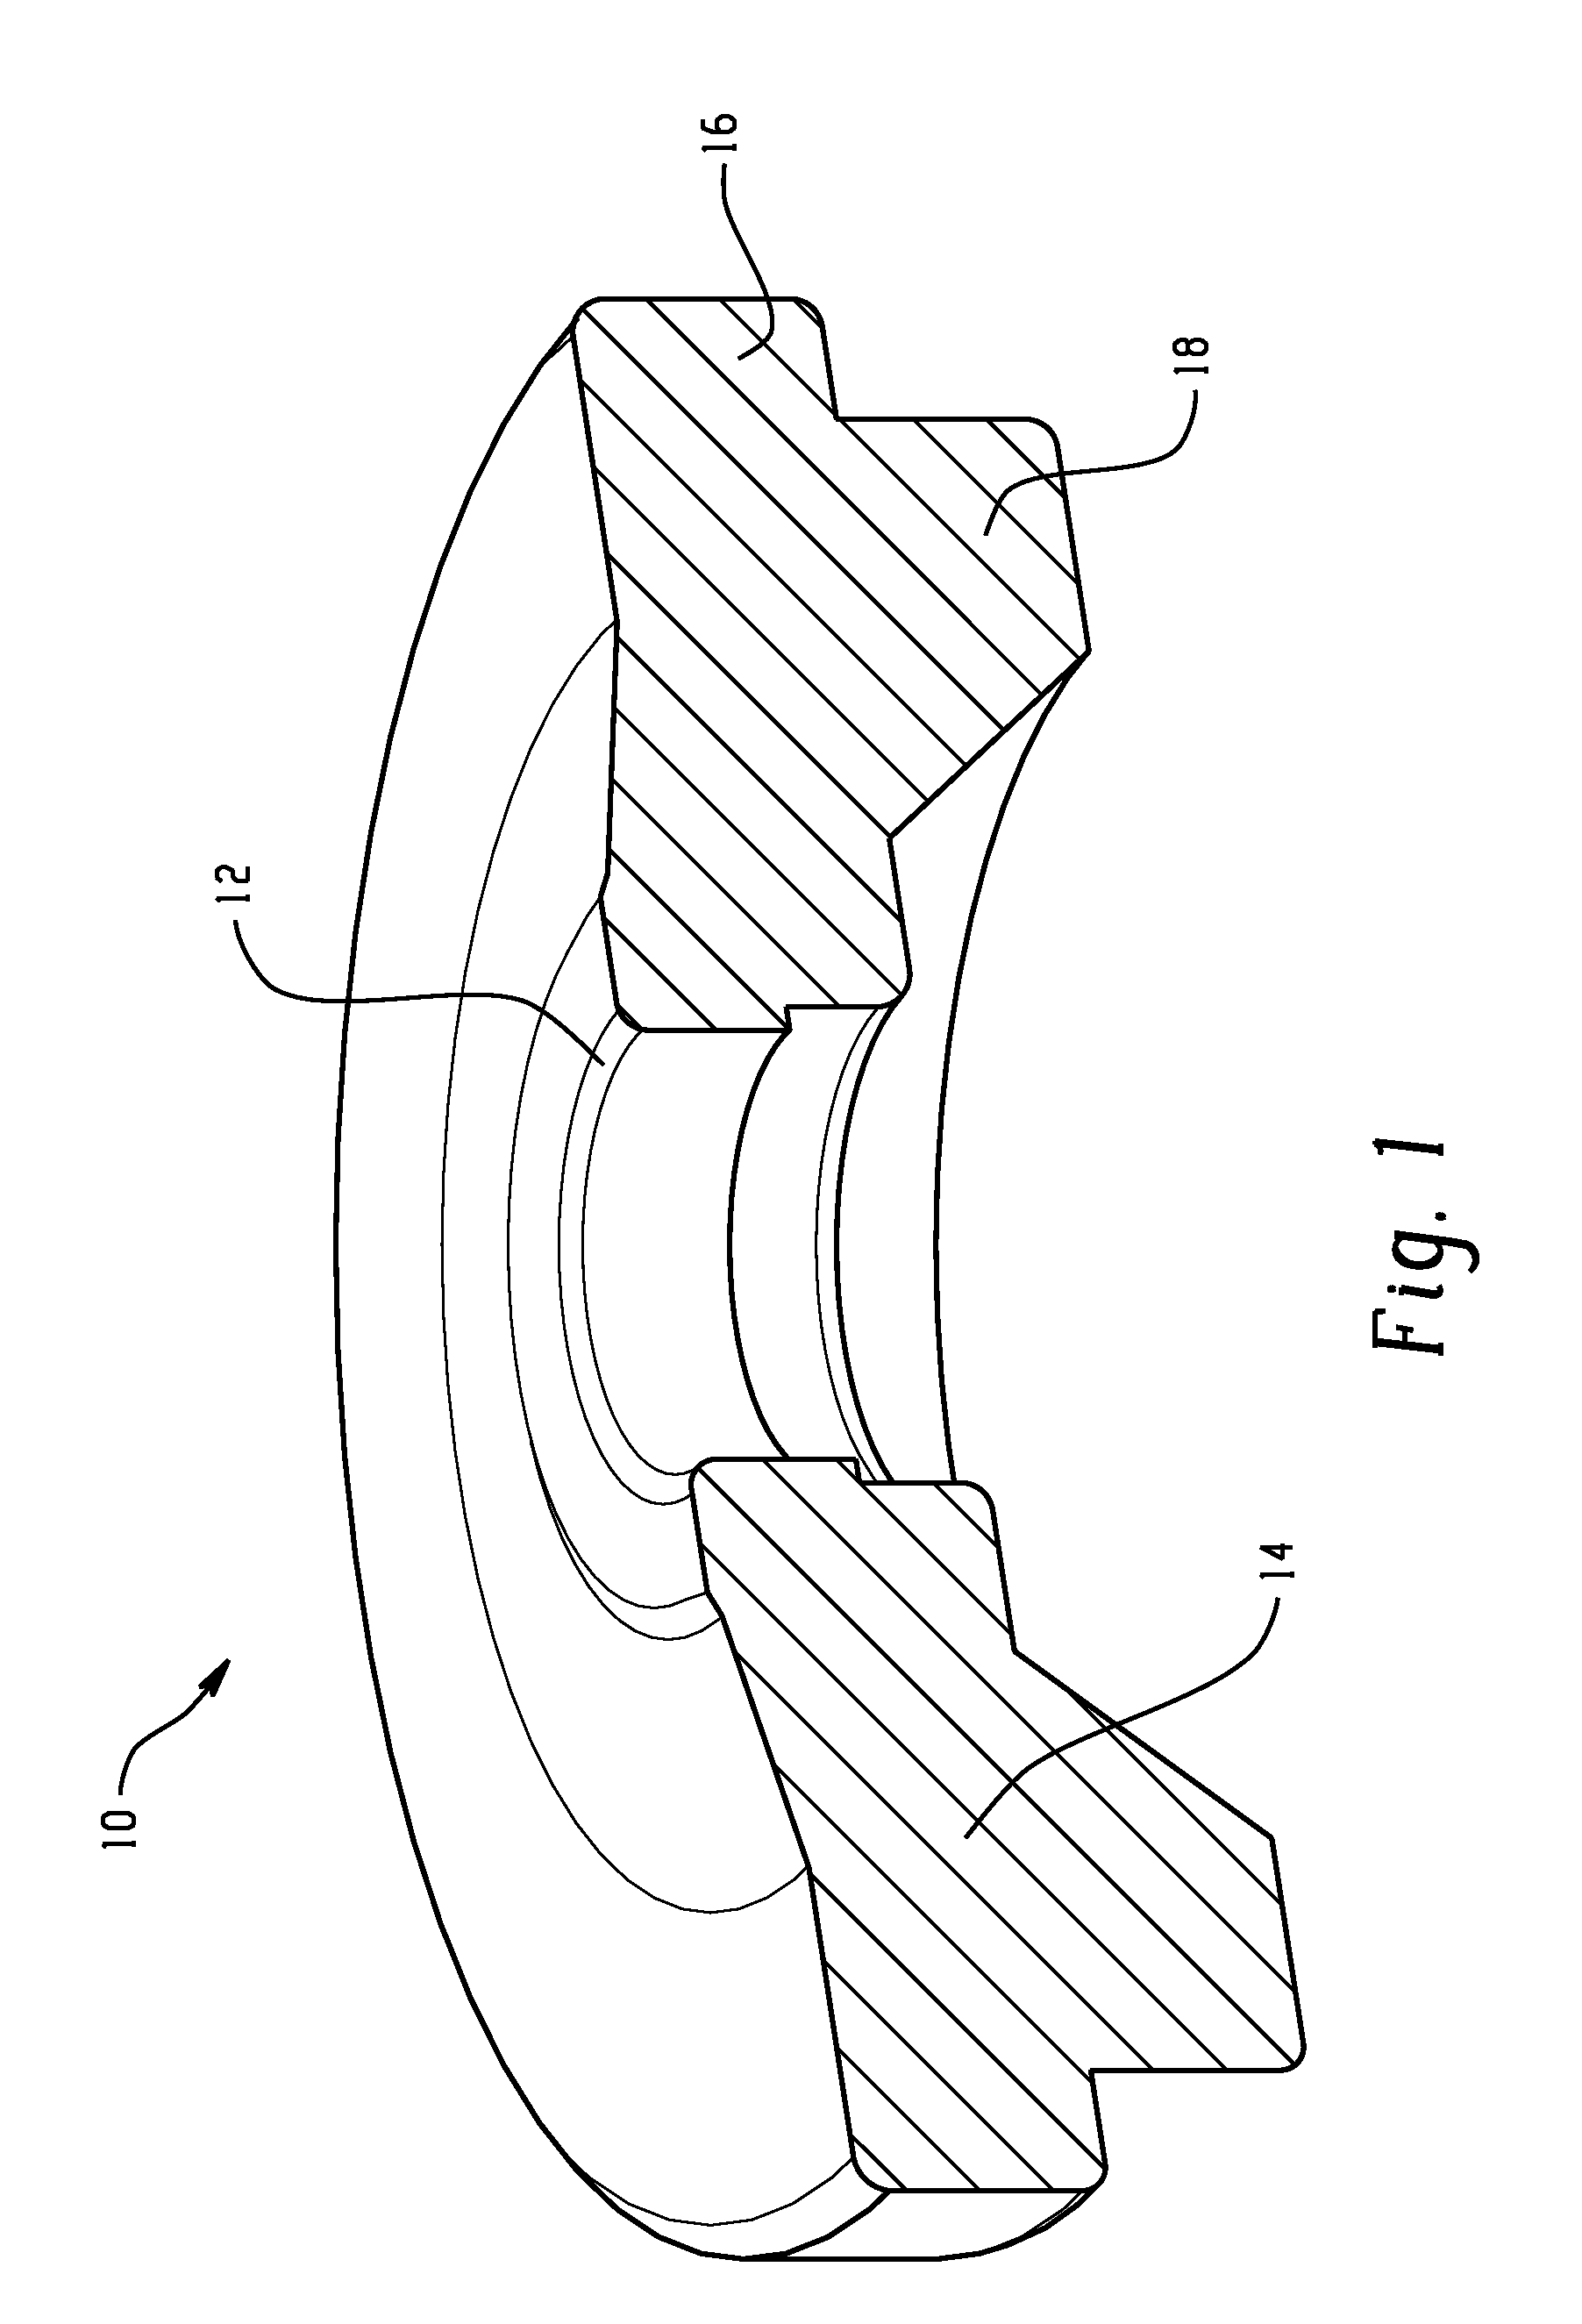 Cooling systems for heat-treated parts and methods of use